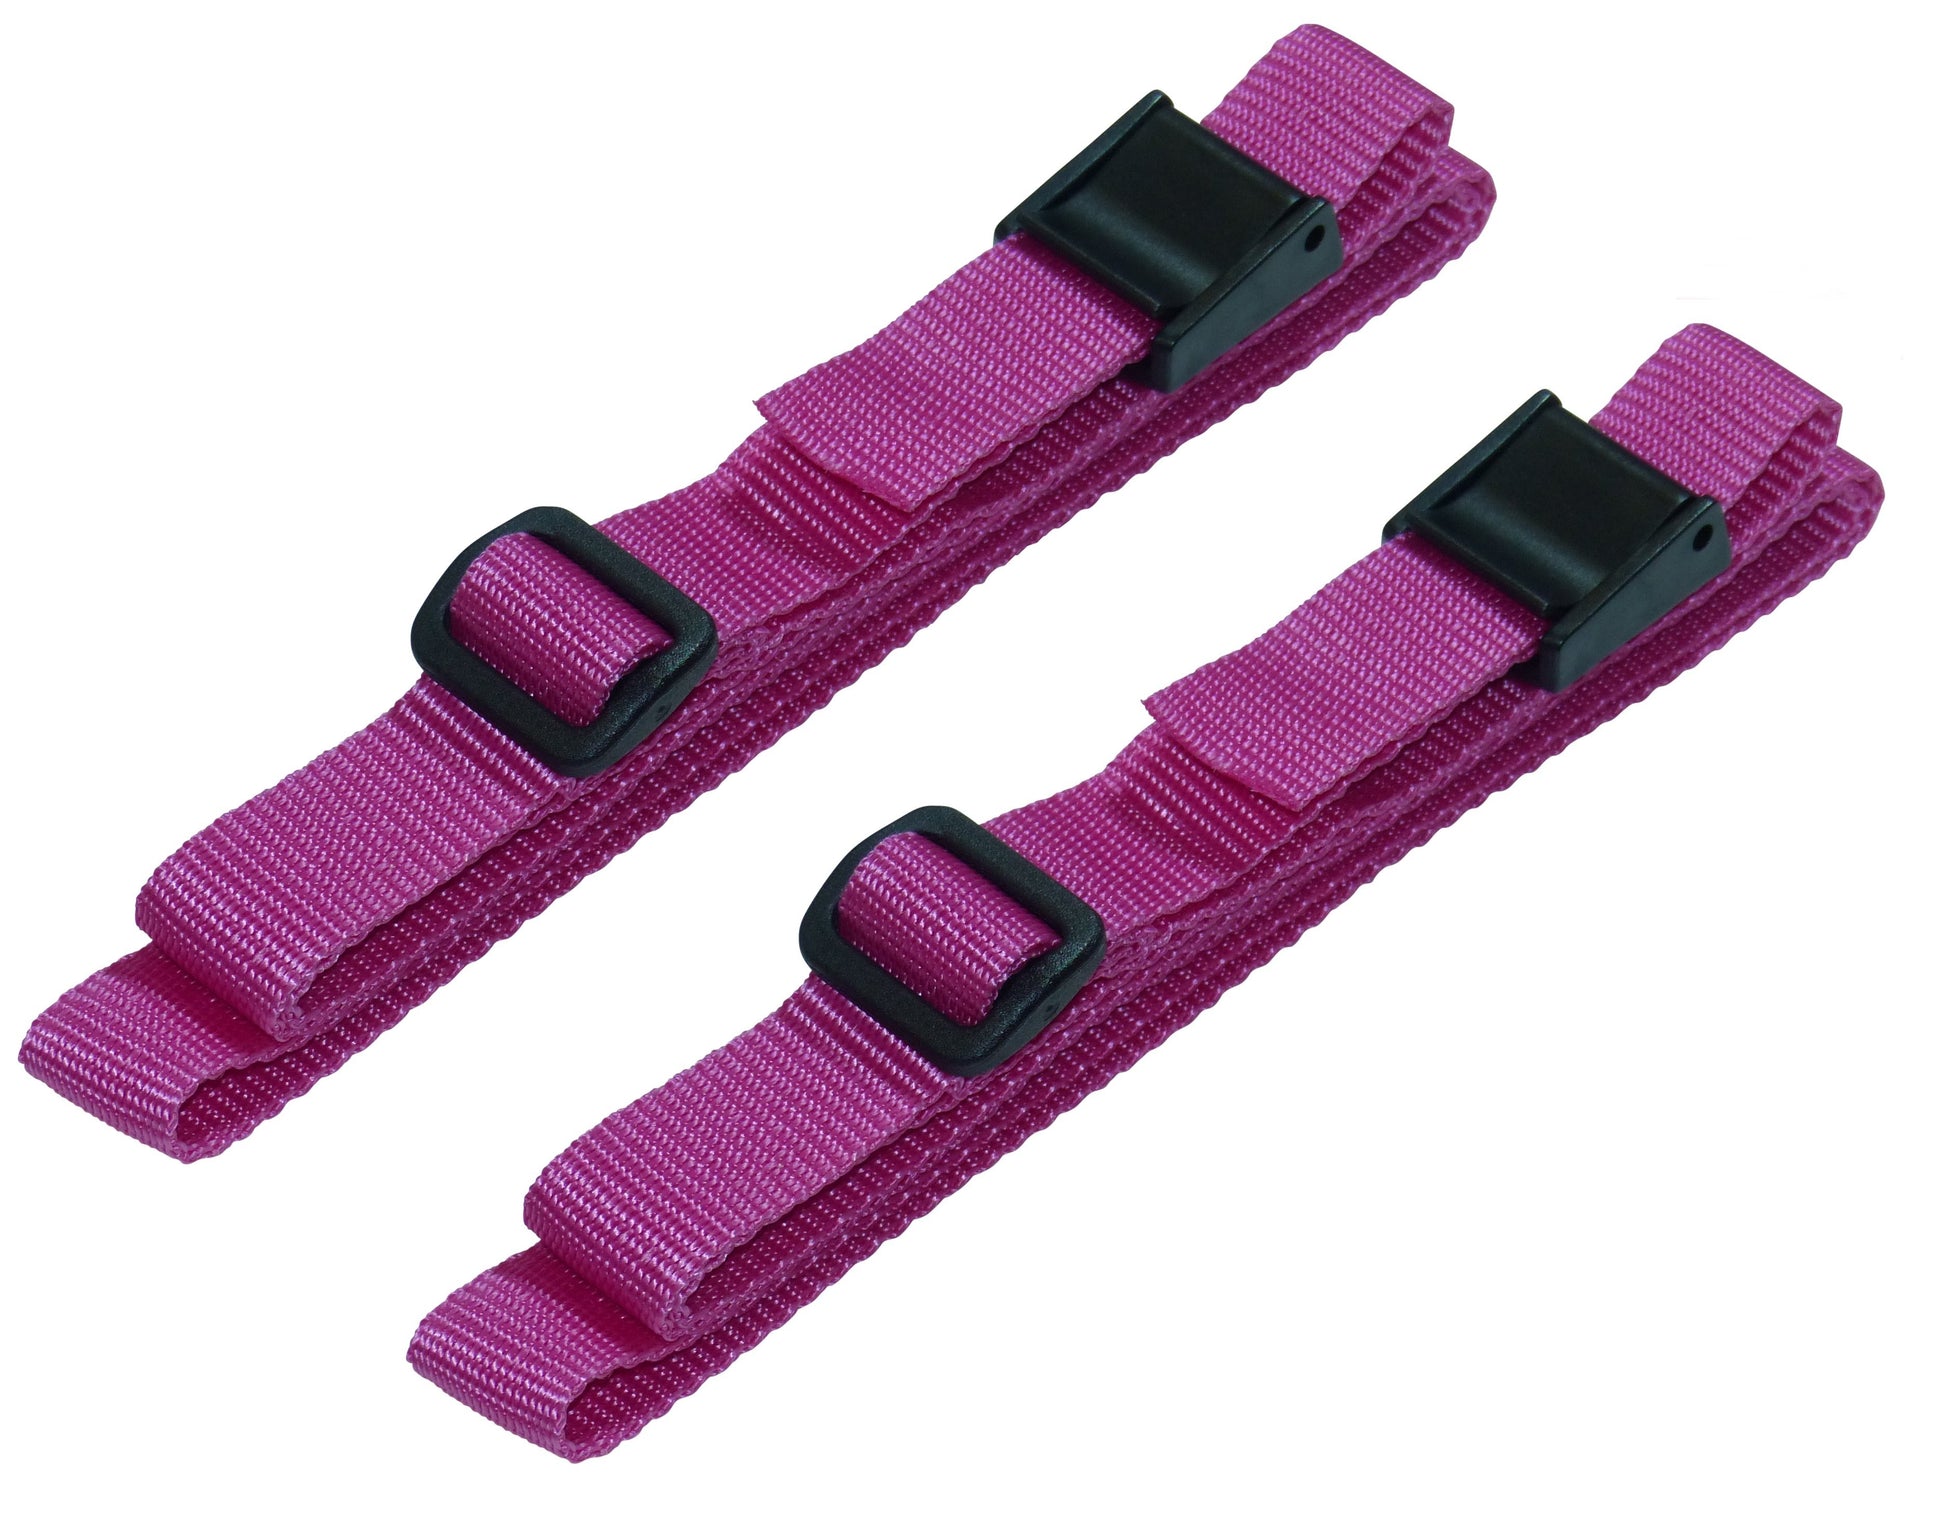 25mm Rivetted Strap with Plastic Cam Buckle & Triglide Buckles (Pair) in pink